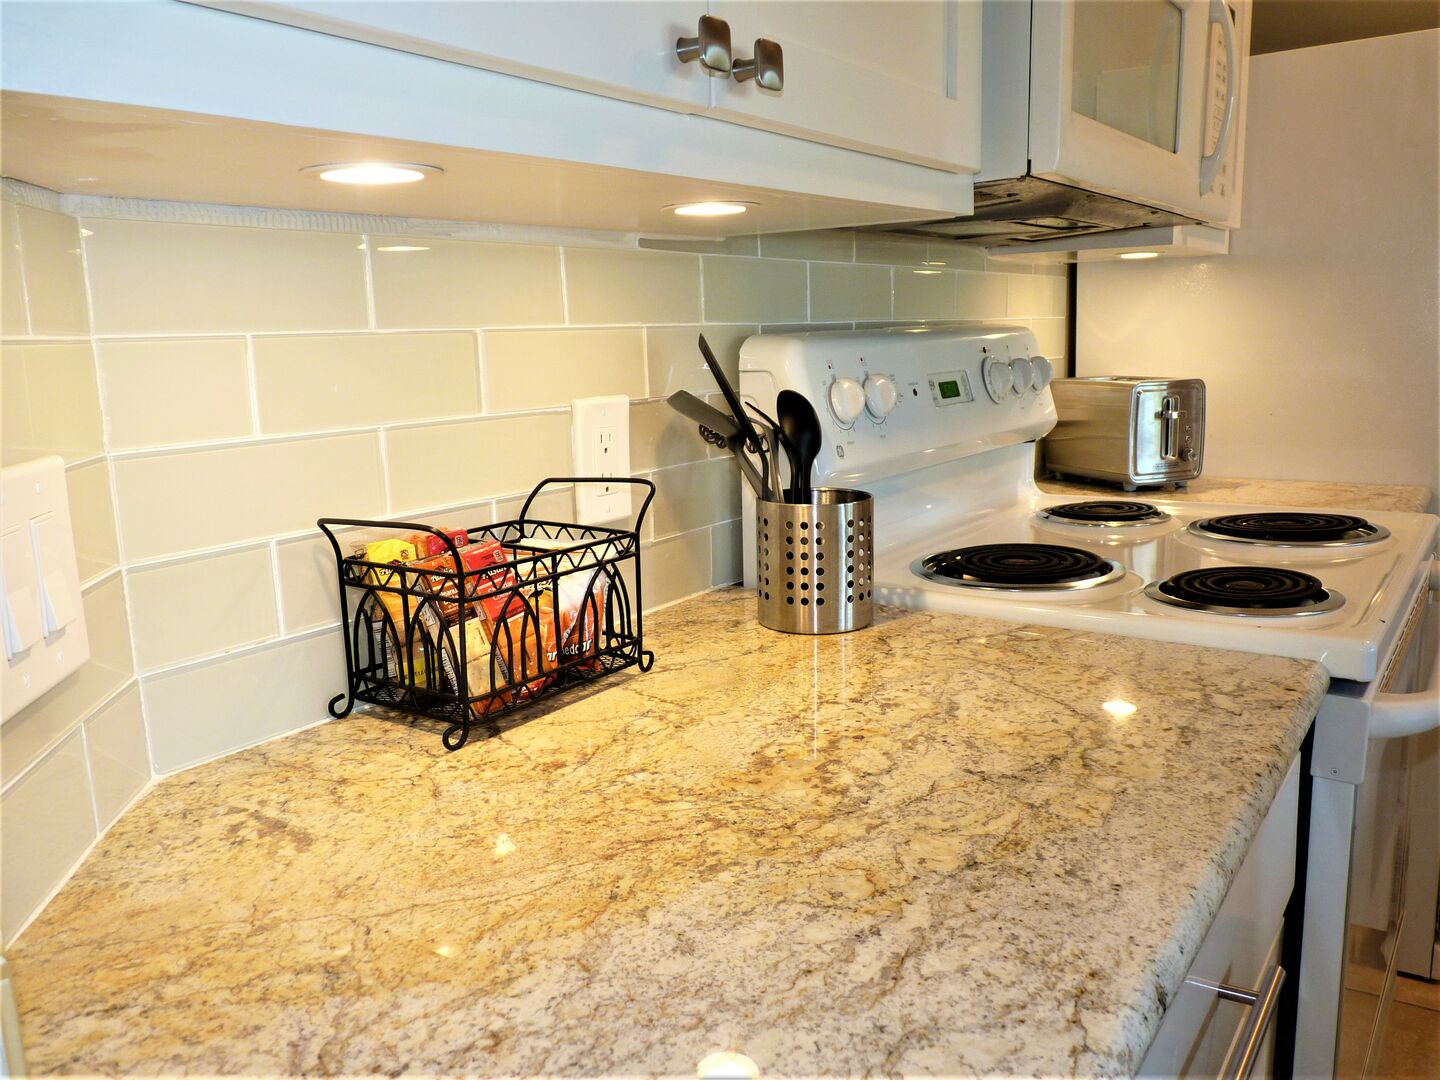 There's lovely glass, subway tile all along the back splash and the under-the-counter lights are such a nice touch!